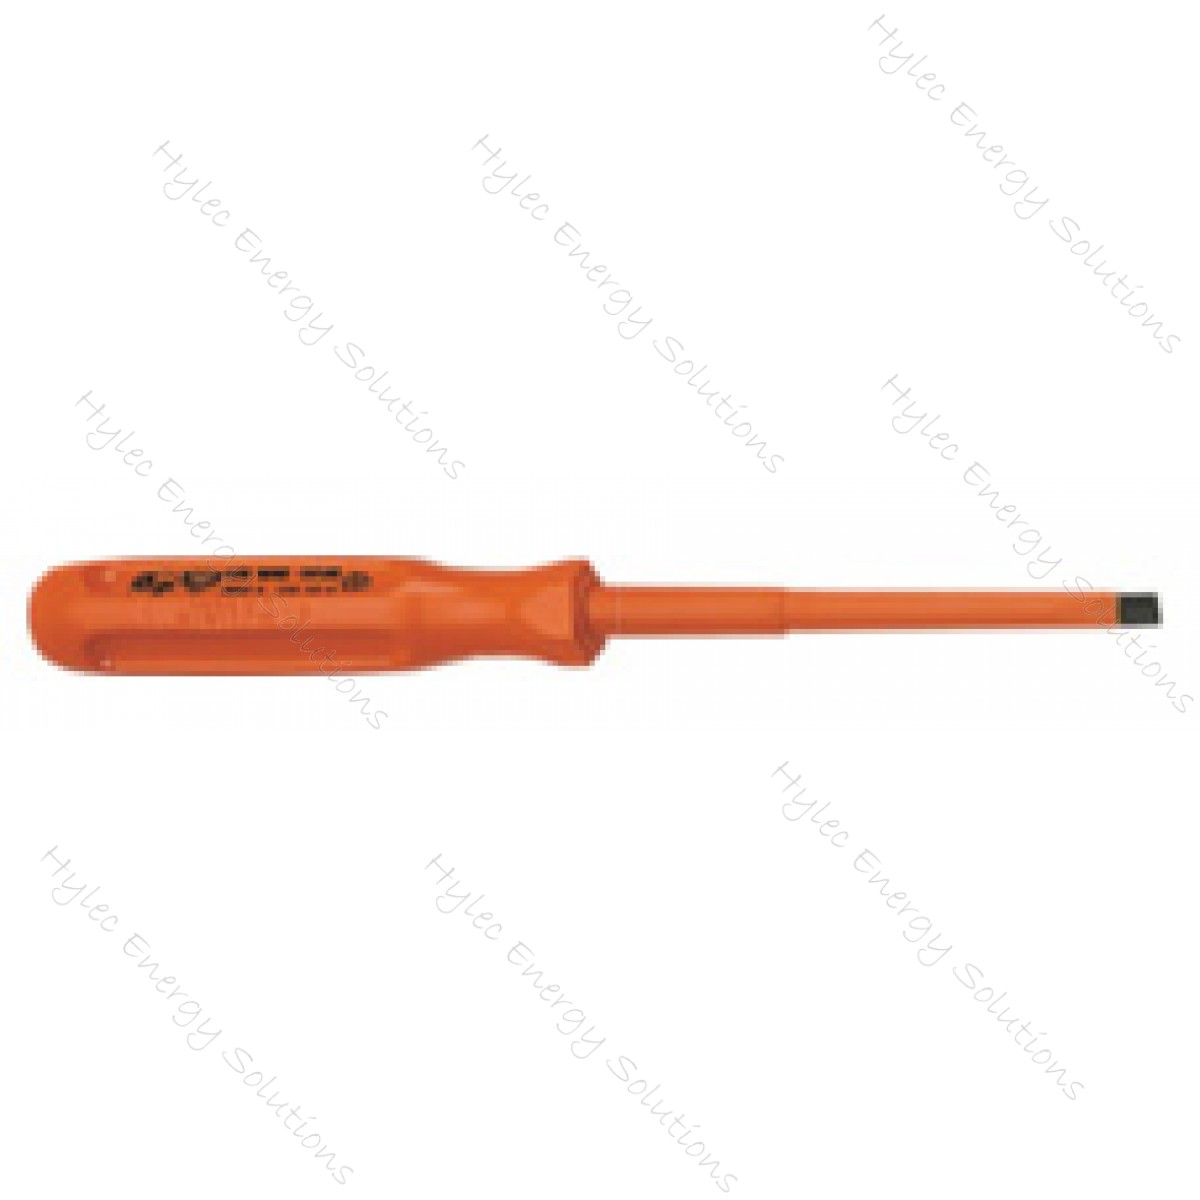 Sibille Screwdriver 10,000 Volt Rated Made in France